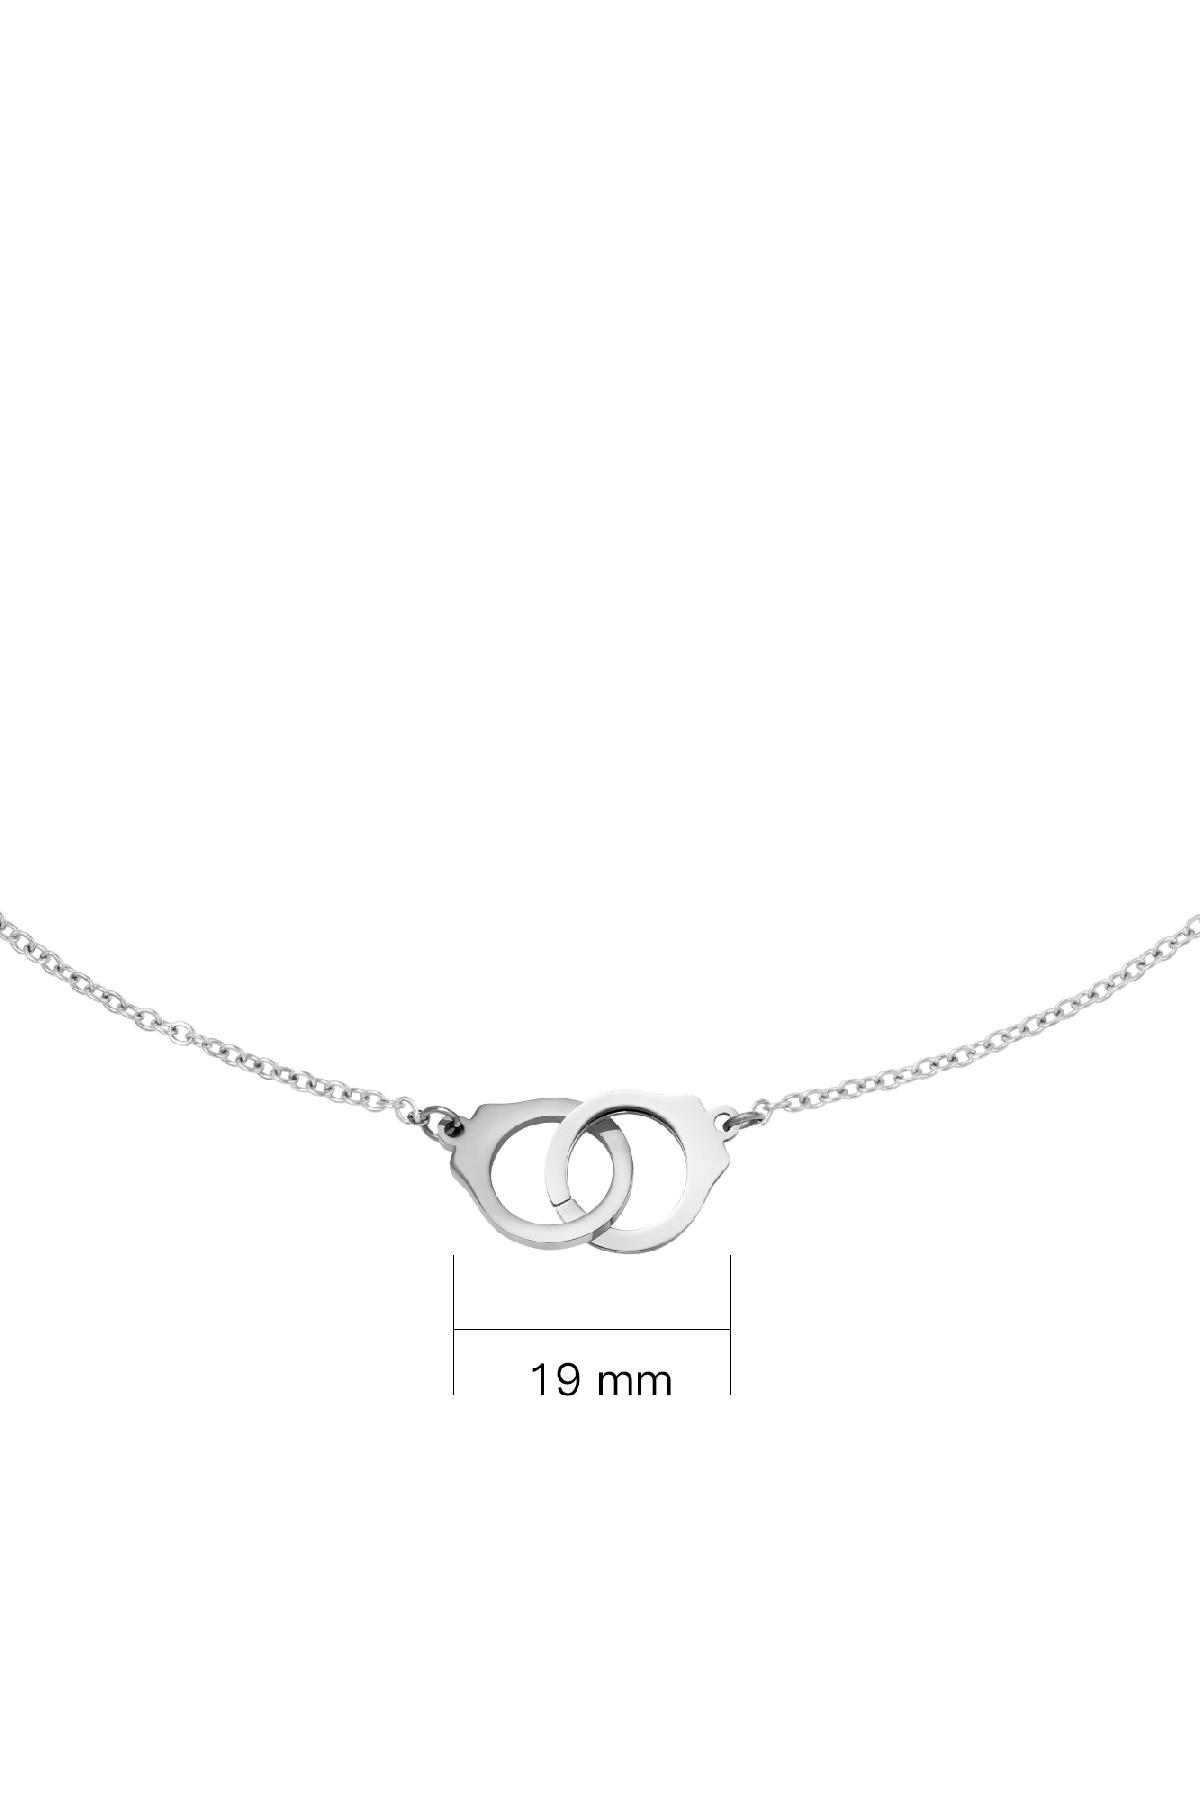 Necklace Handcuffs Silver Stainless Steel h5 Picture3